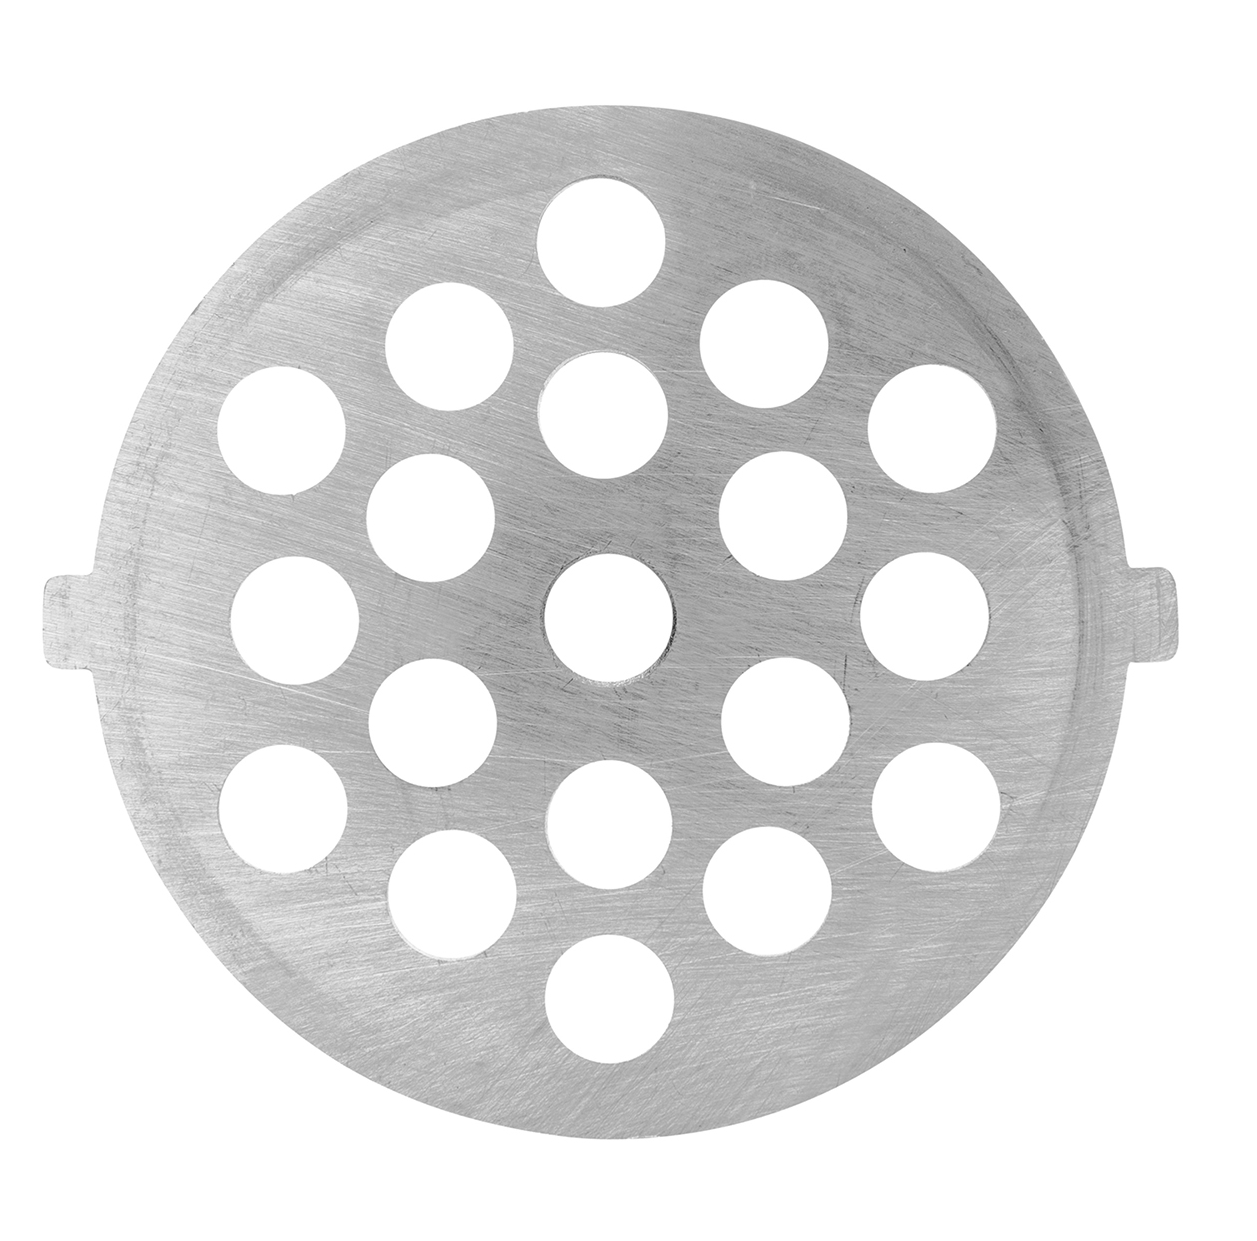 8mm Stainless Steel Cutting Plate for the Luvele Meat grinder